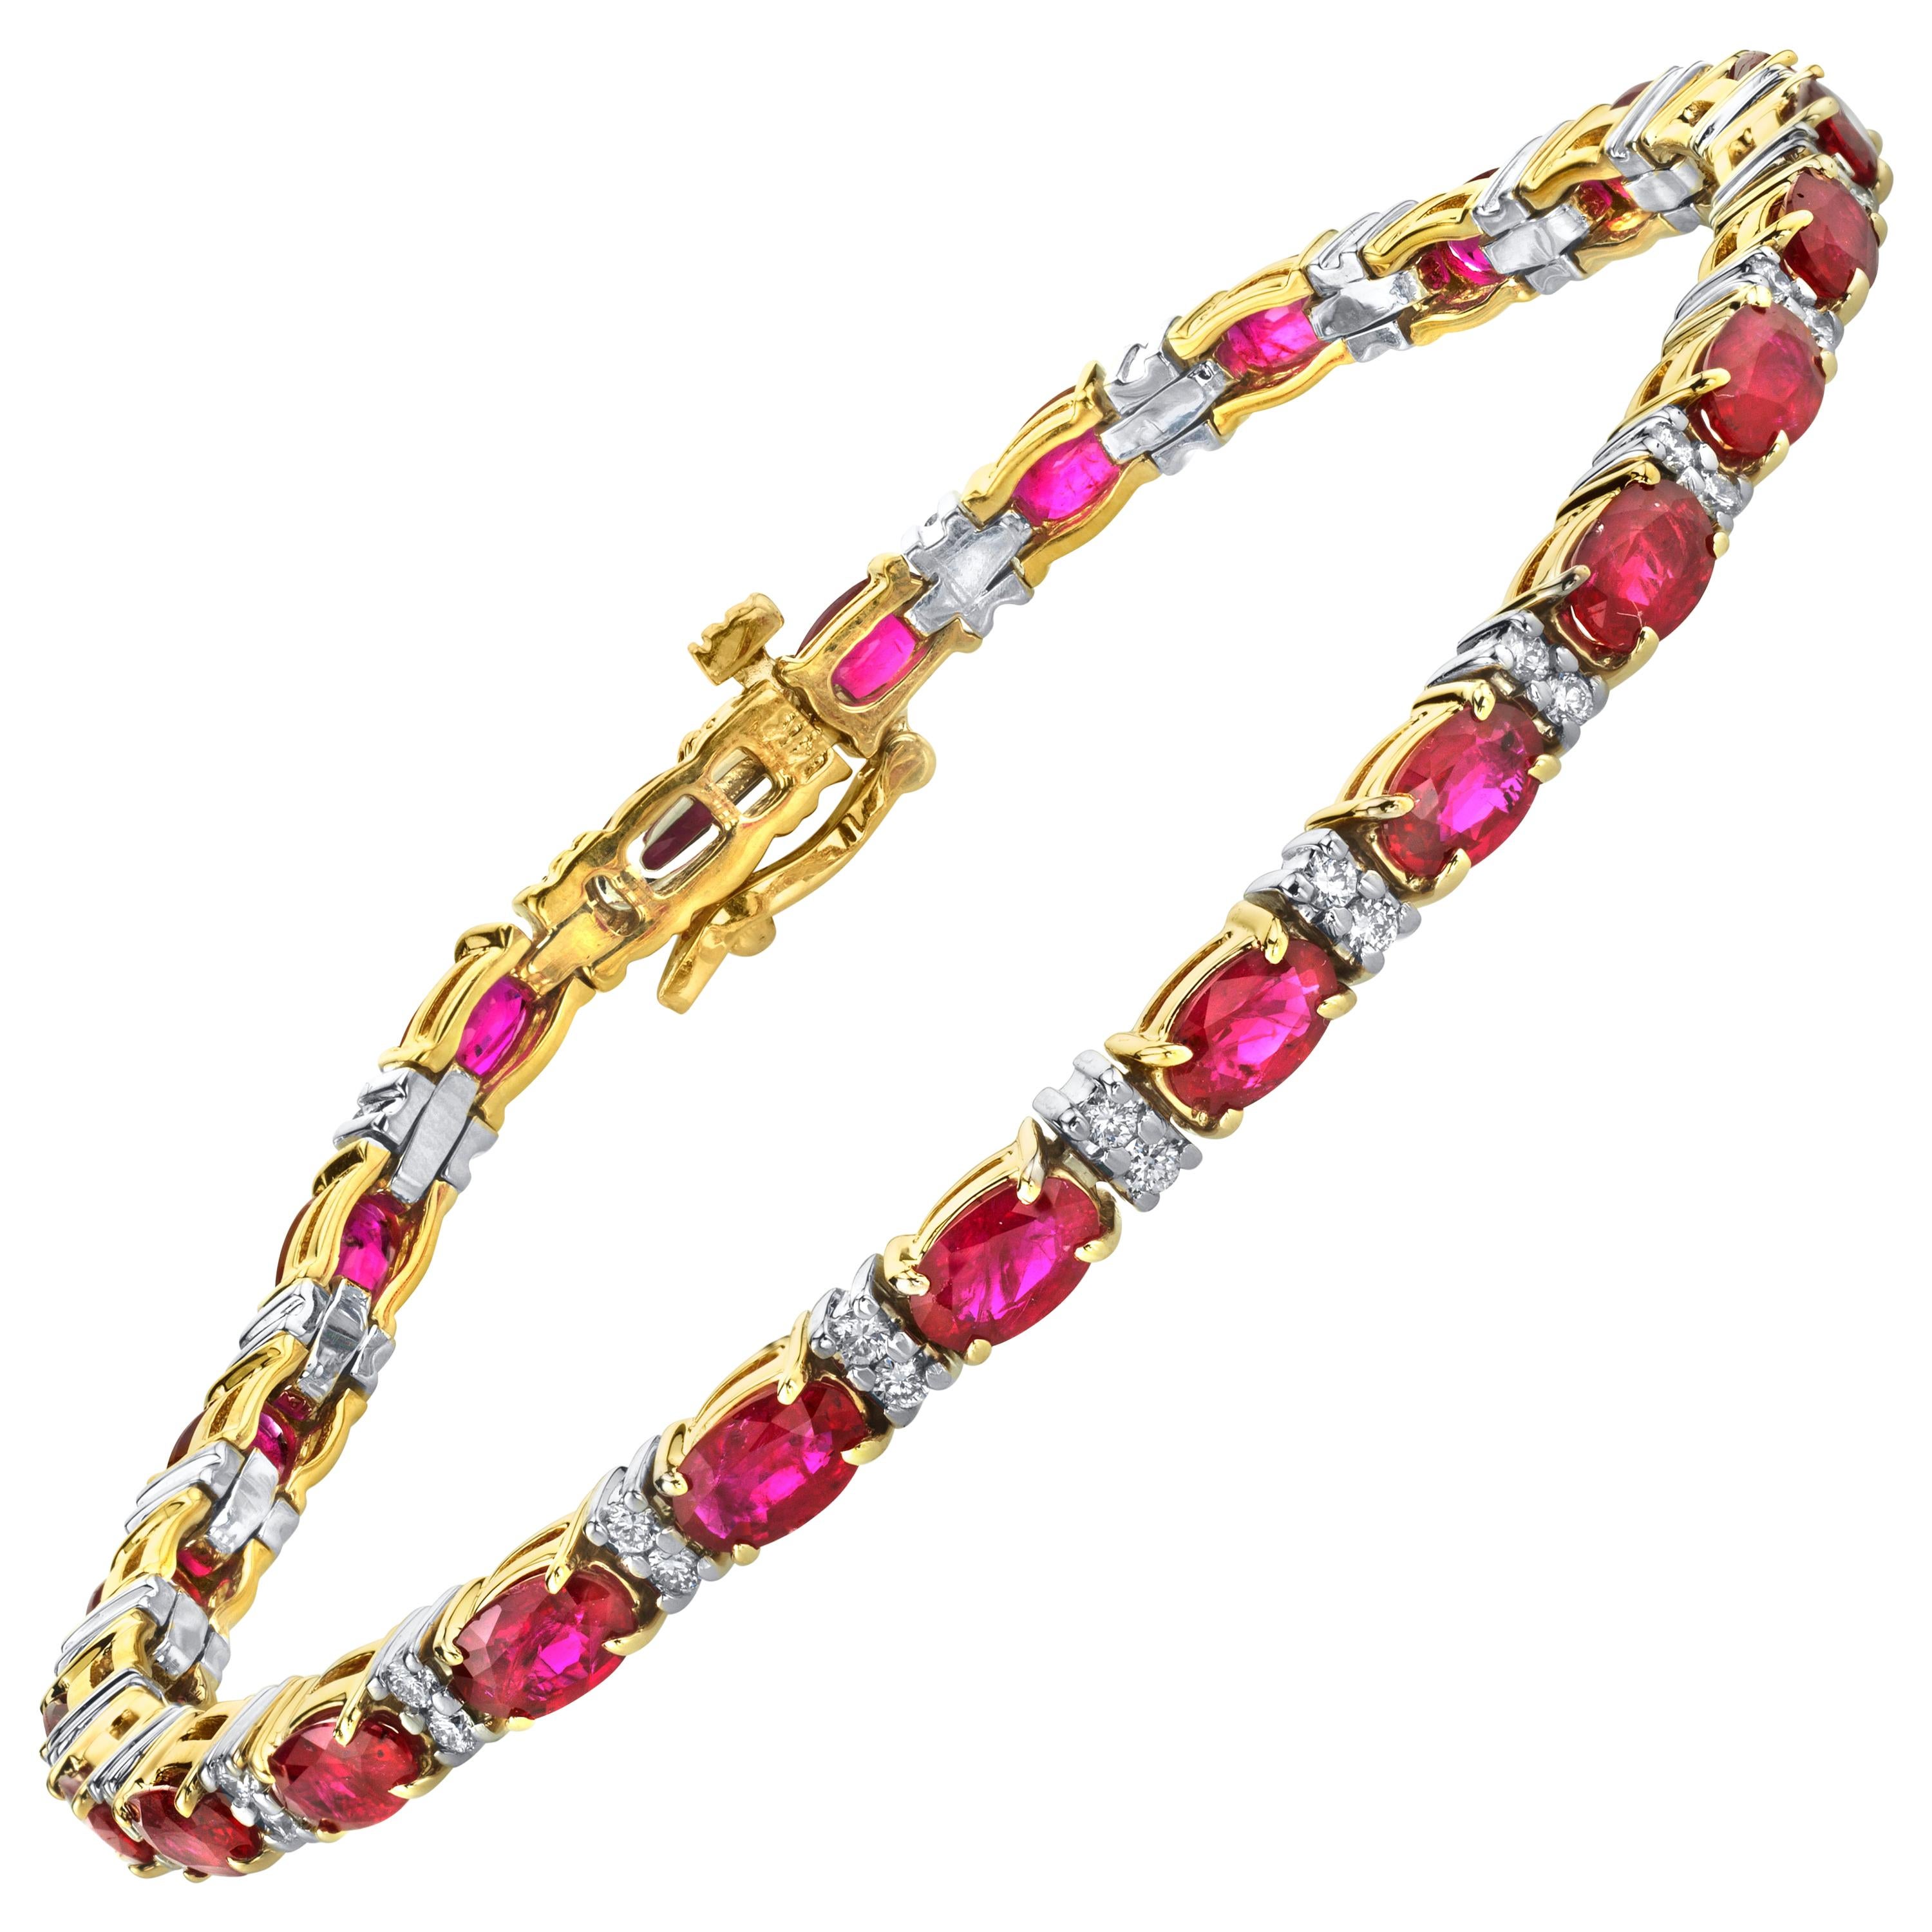 This stunning ruby and diamond tennis bracelet features over 6 carats of bright, vibrant rubies paired with a half carat of brilliant cut diamonds! Twenty-four luscious rubies are set in 14k yellow gold, alternating with sparkling diamonds set in